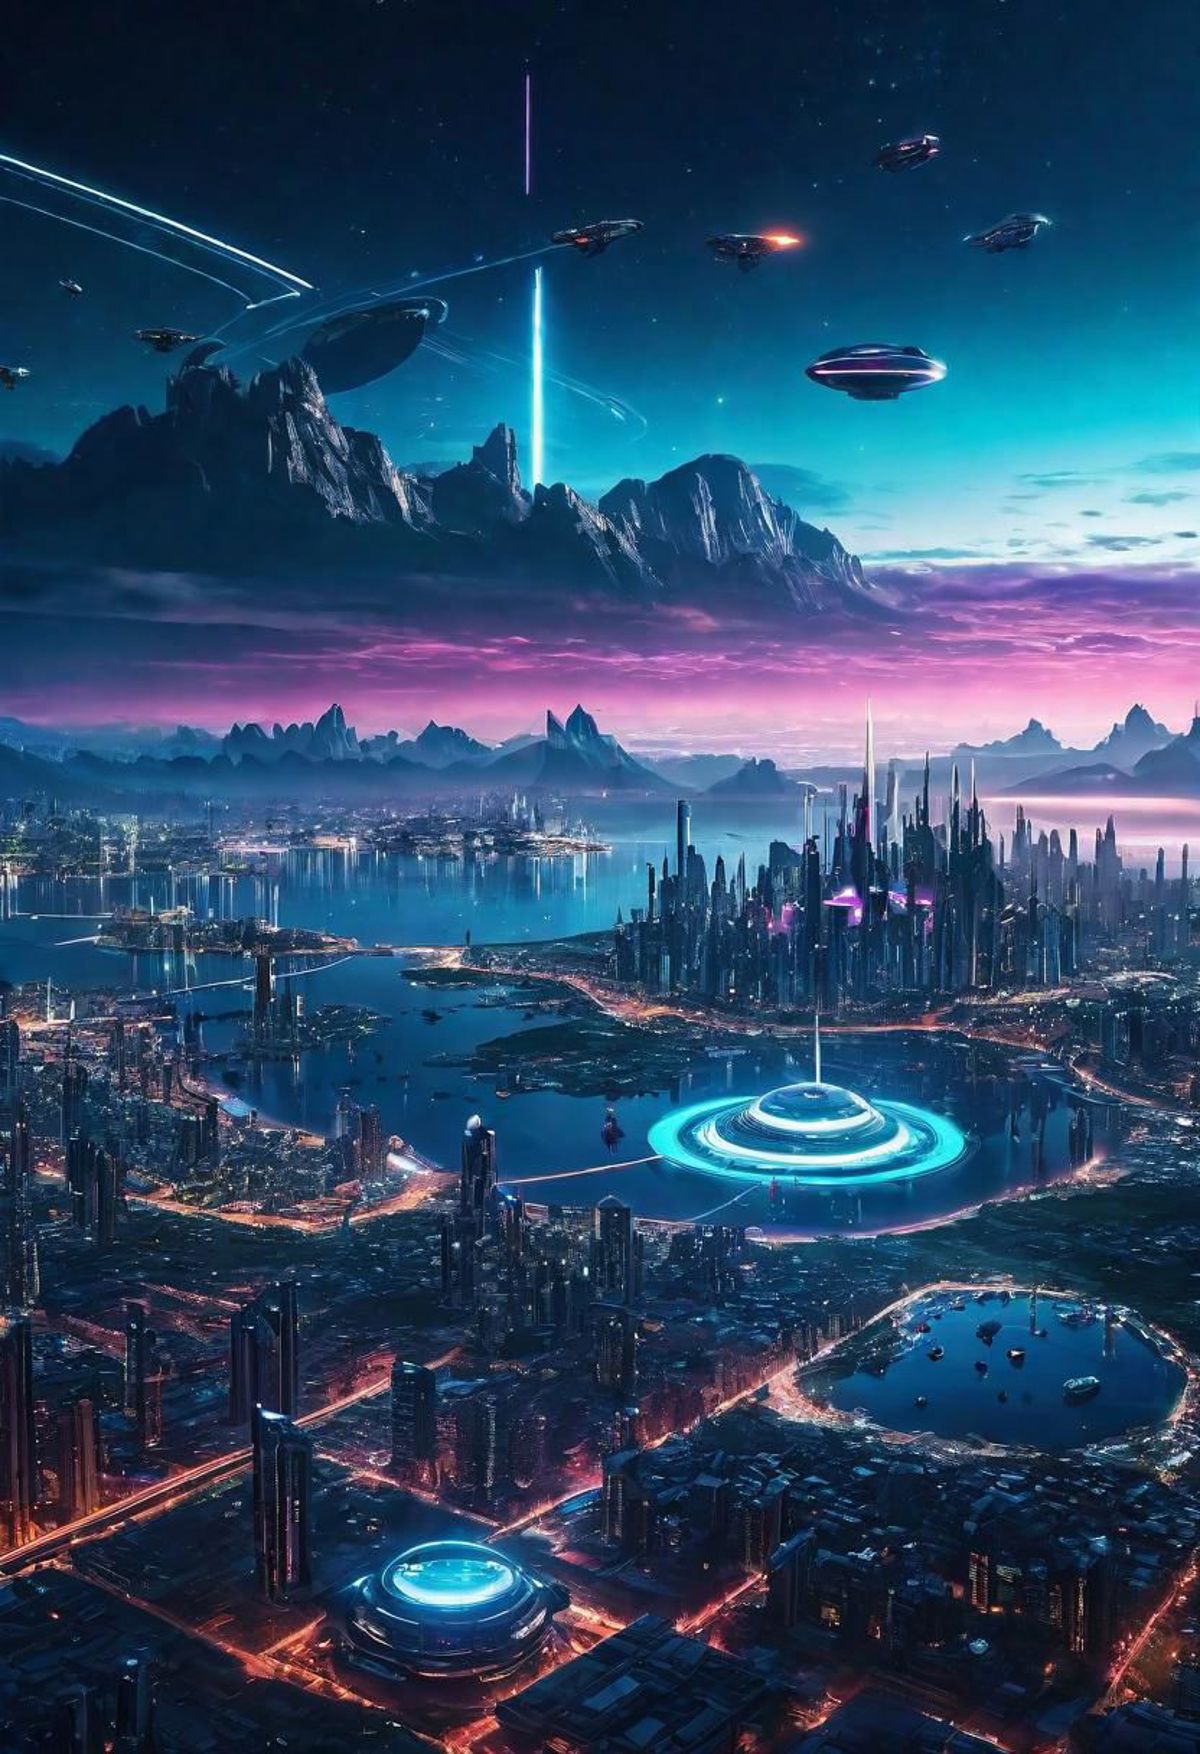 Futuristic Cityscape with Alien Spaceships and Futuristic Buildings at Night